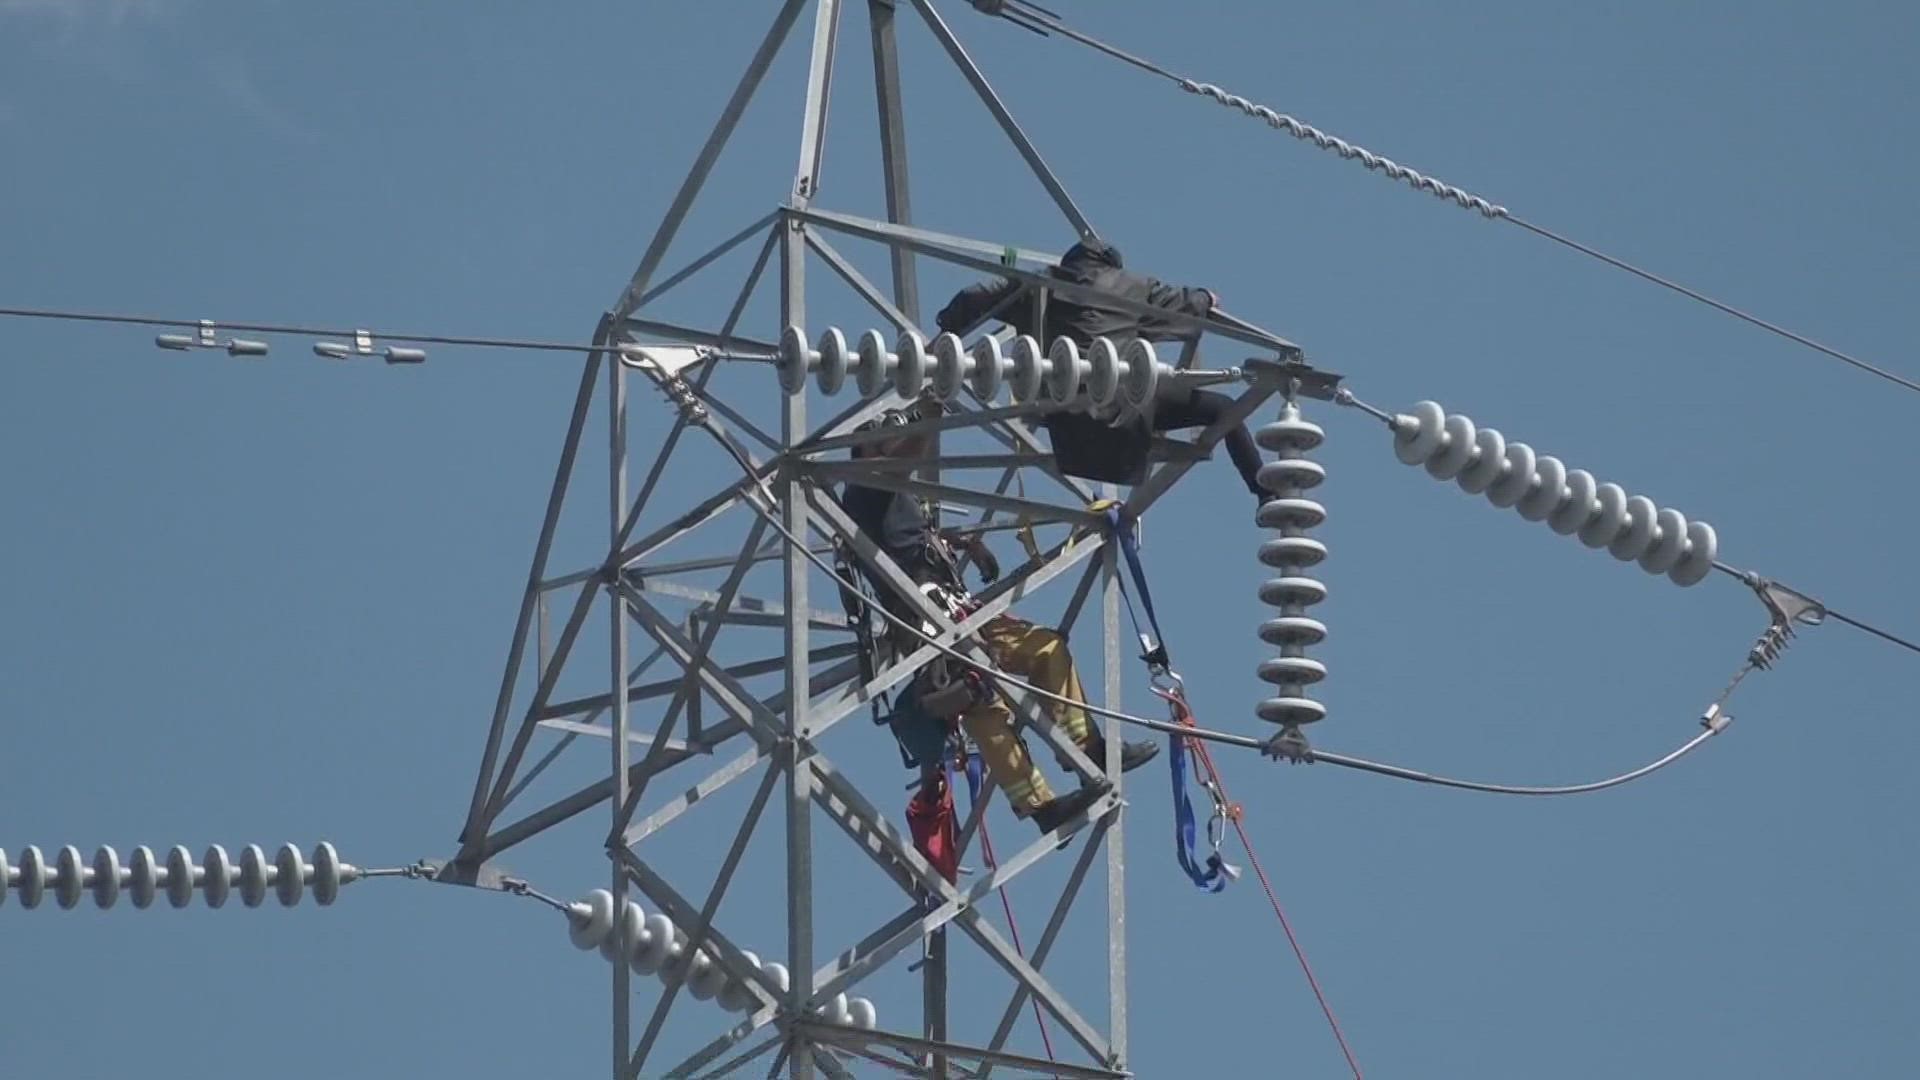 Sacramento Fire is trying to get a woman in her 30s down from a power transmission tower.